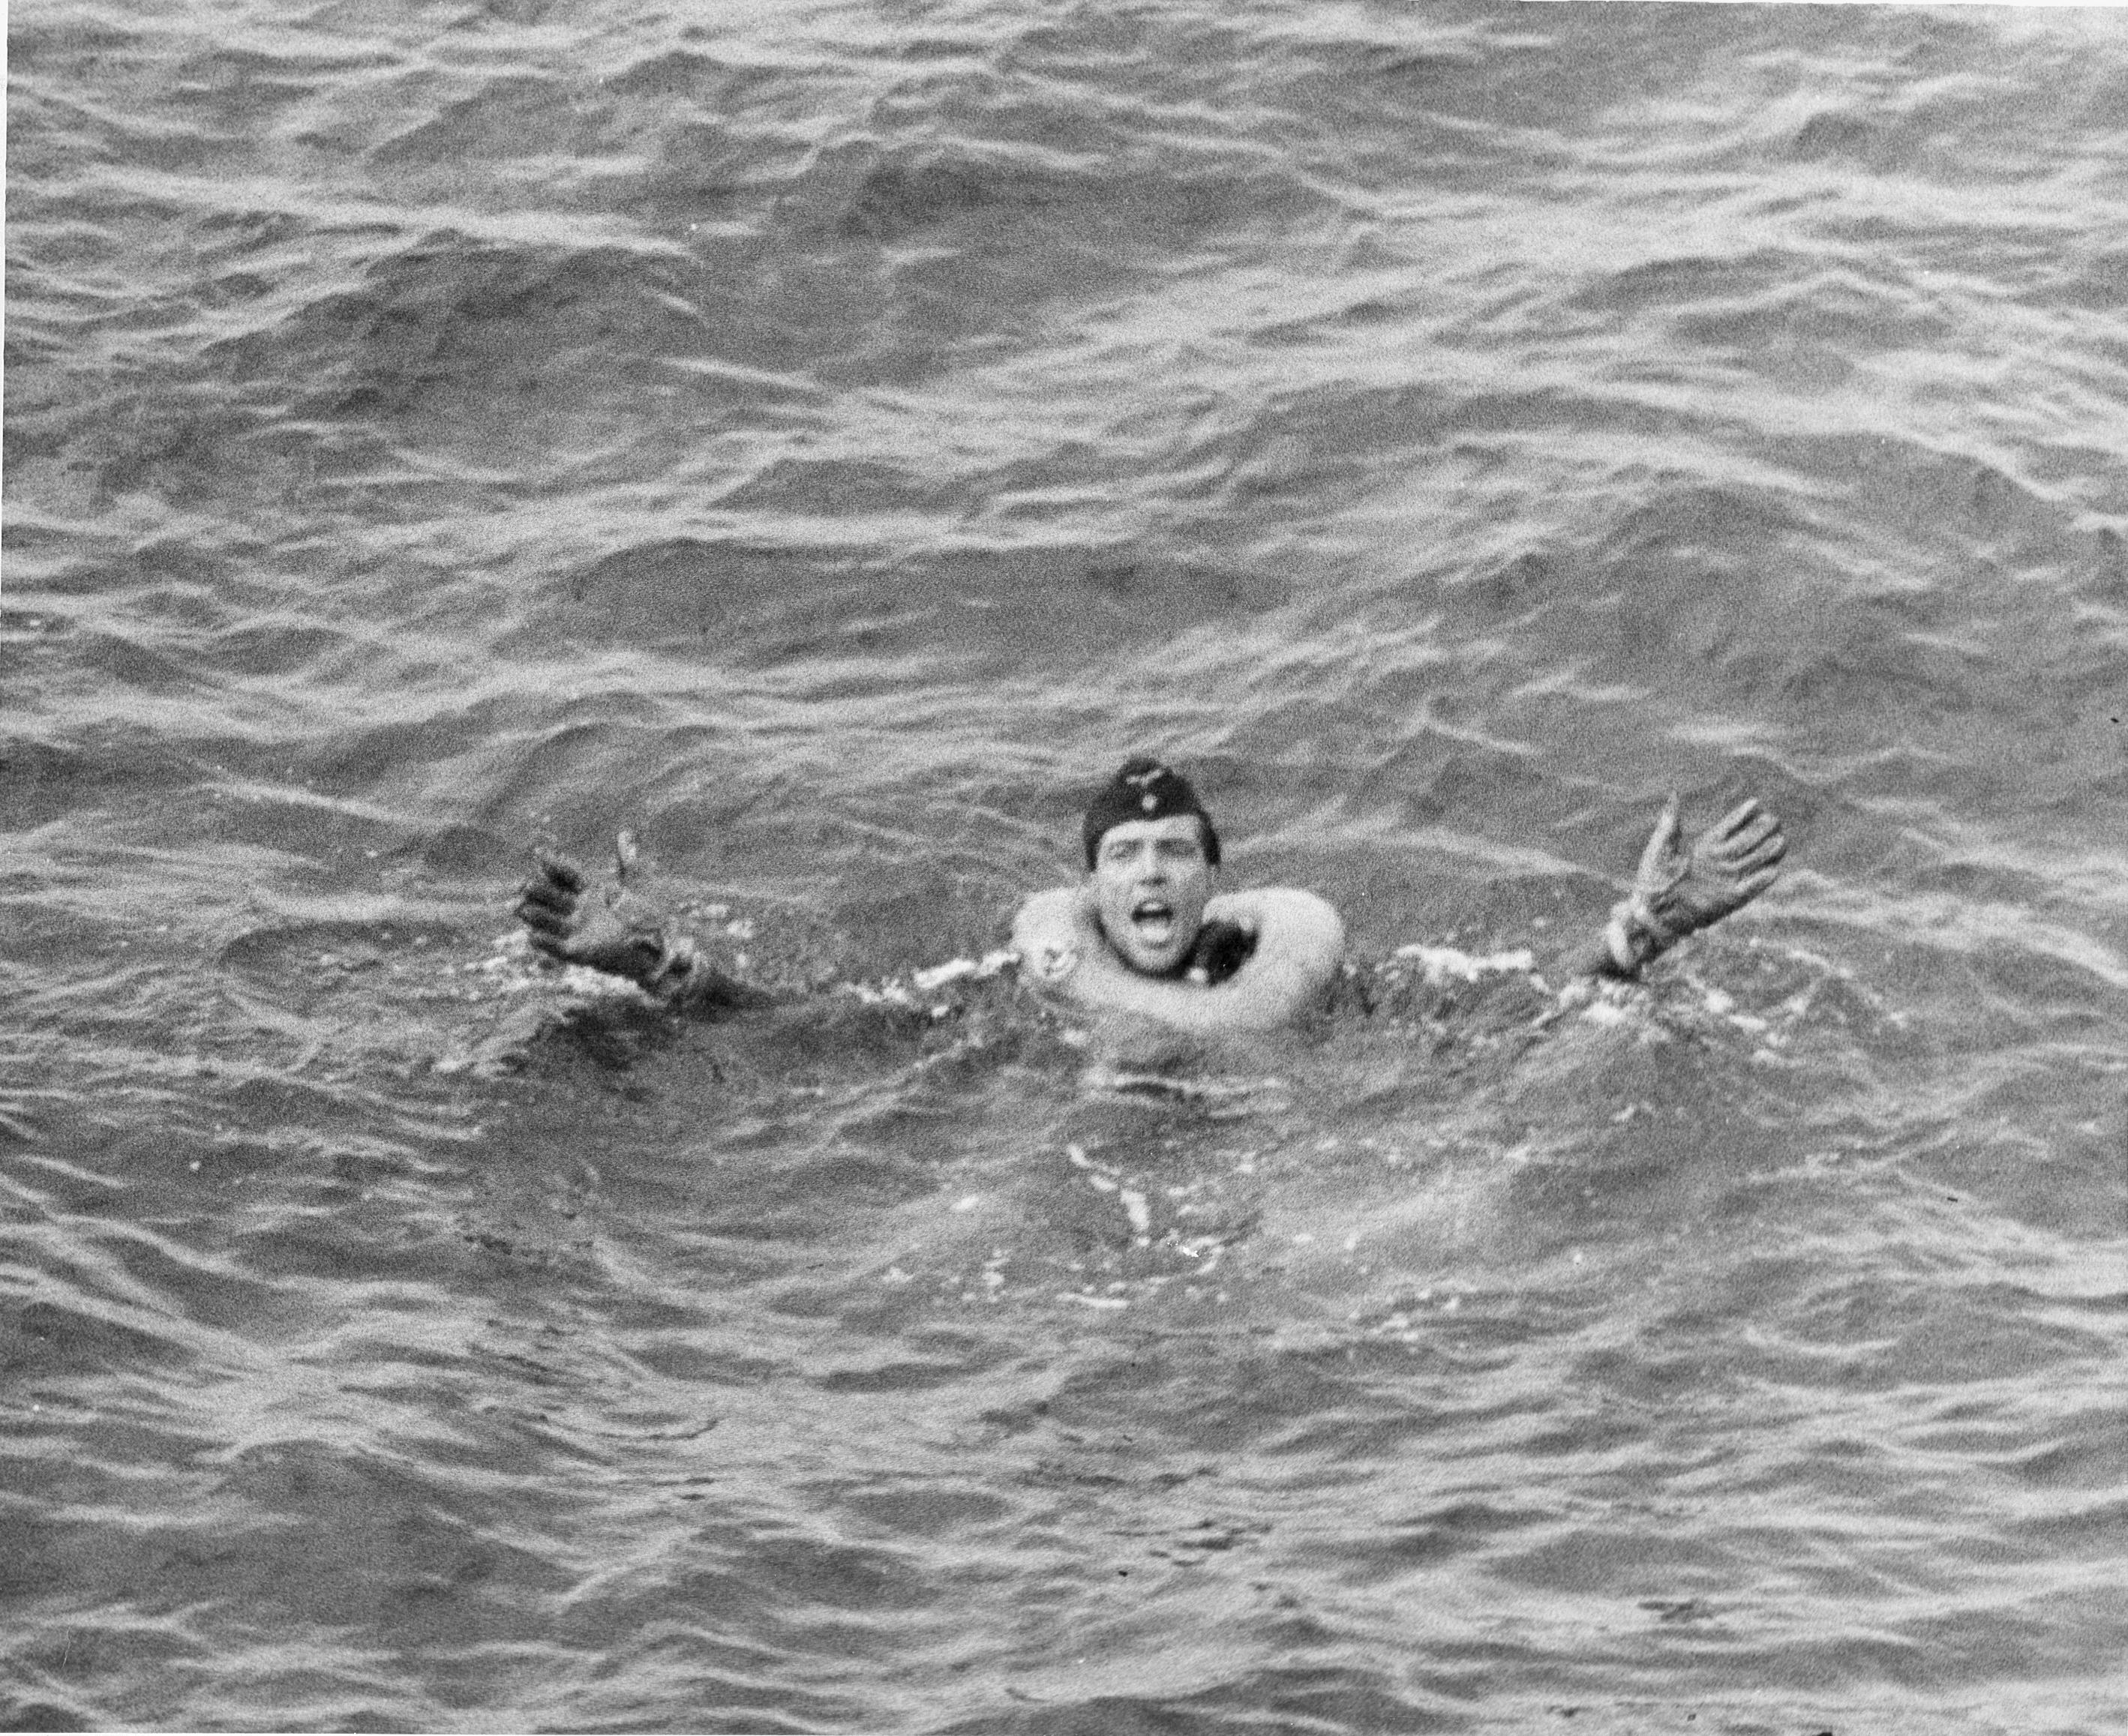 Obersteurmann Helmut Klotzch of U-175 yelled for help after the submarine sank in the North Atlantic, 500 nautical miles WSW of Ireland, 17 Apr 1943